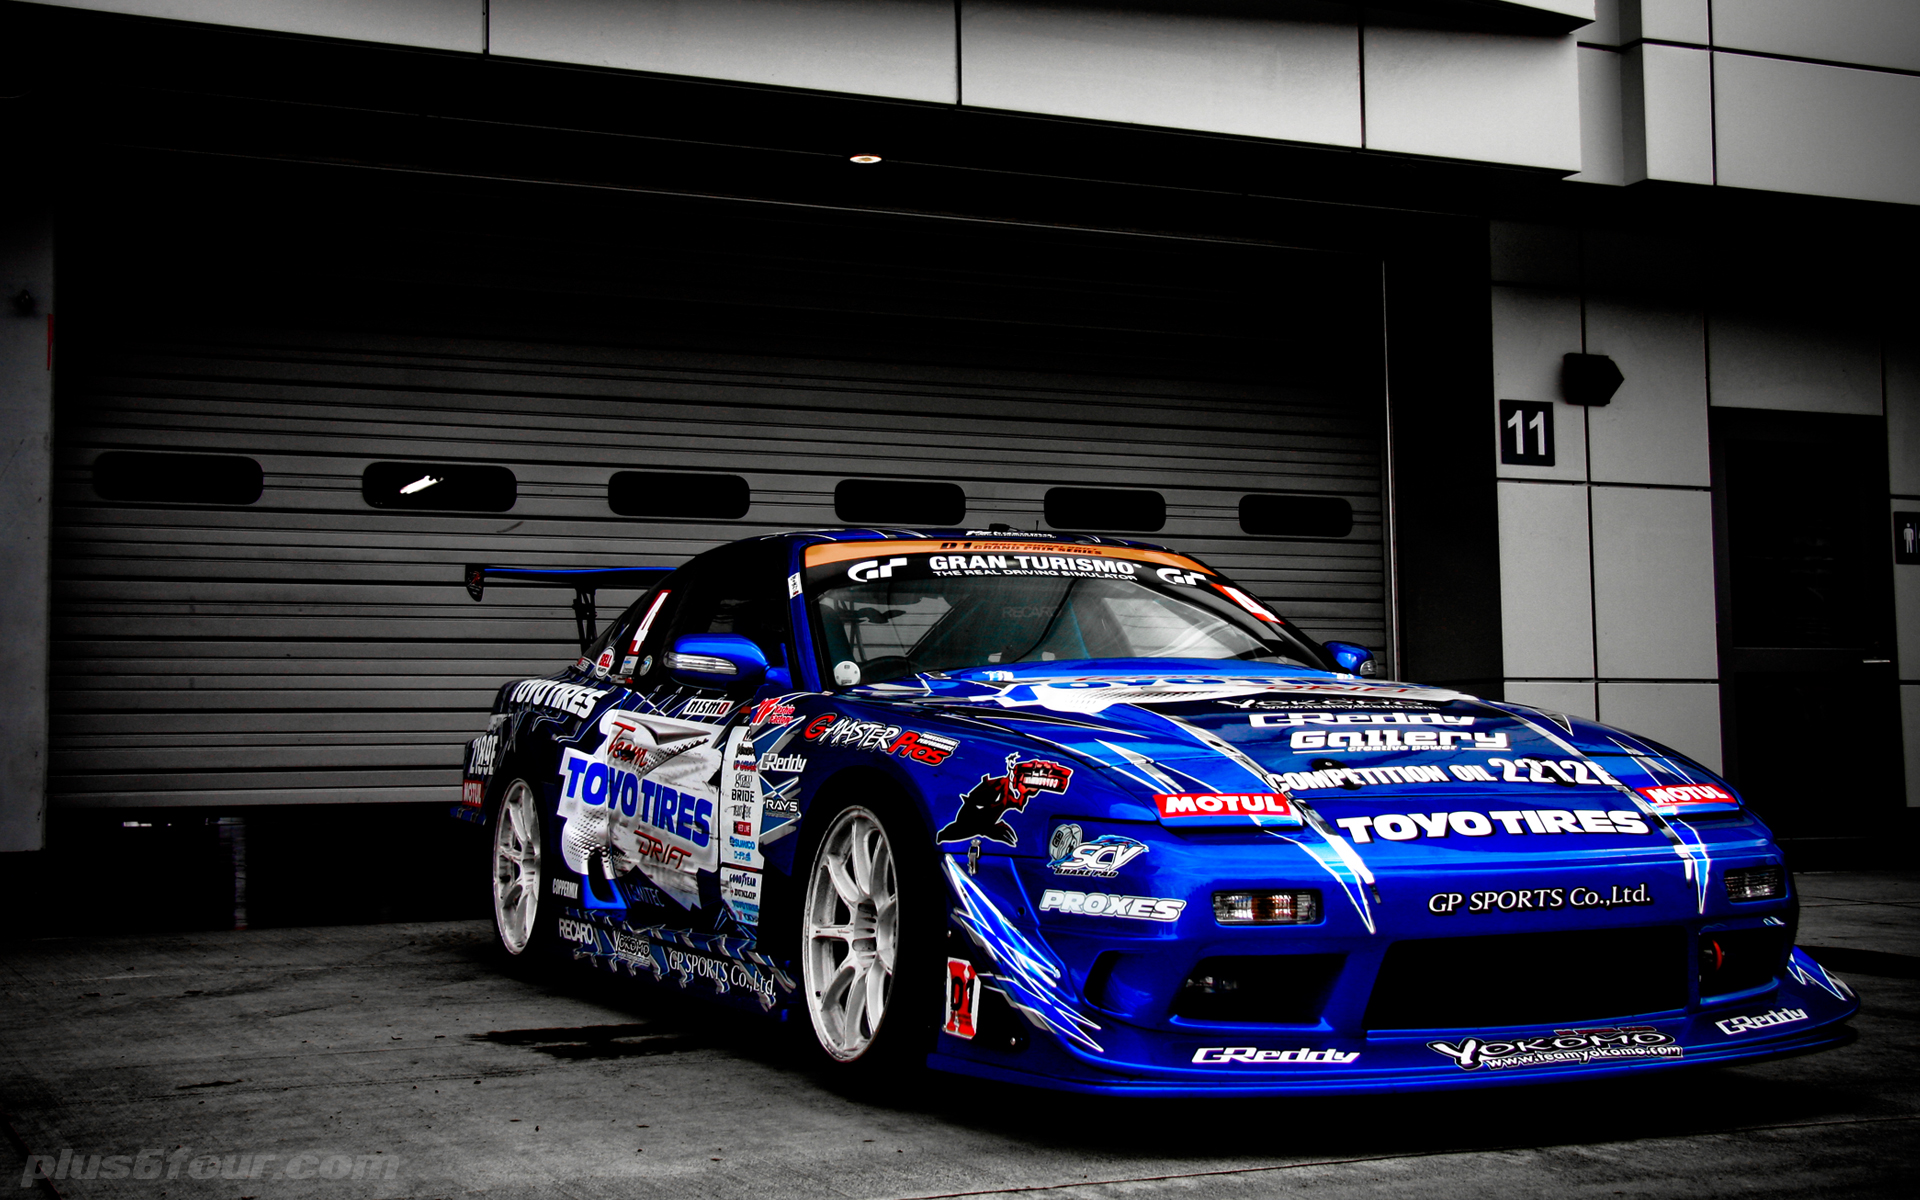 Nissan, Tuning, Race Cars, Blue Cars, Selective Coloring Wallpaper